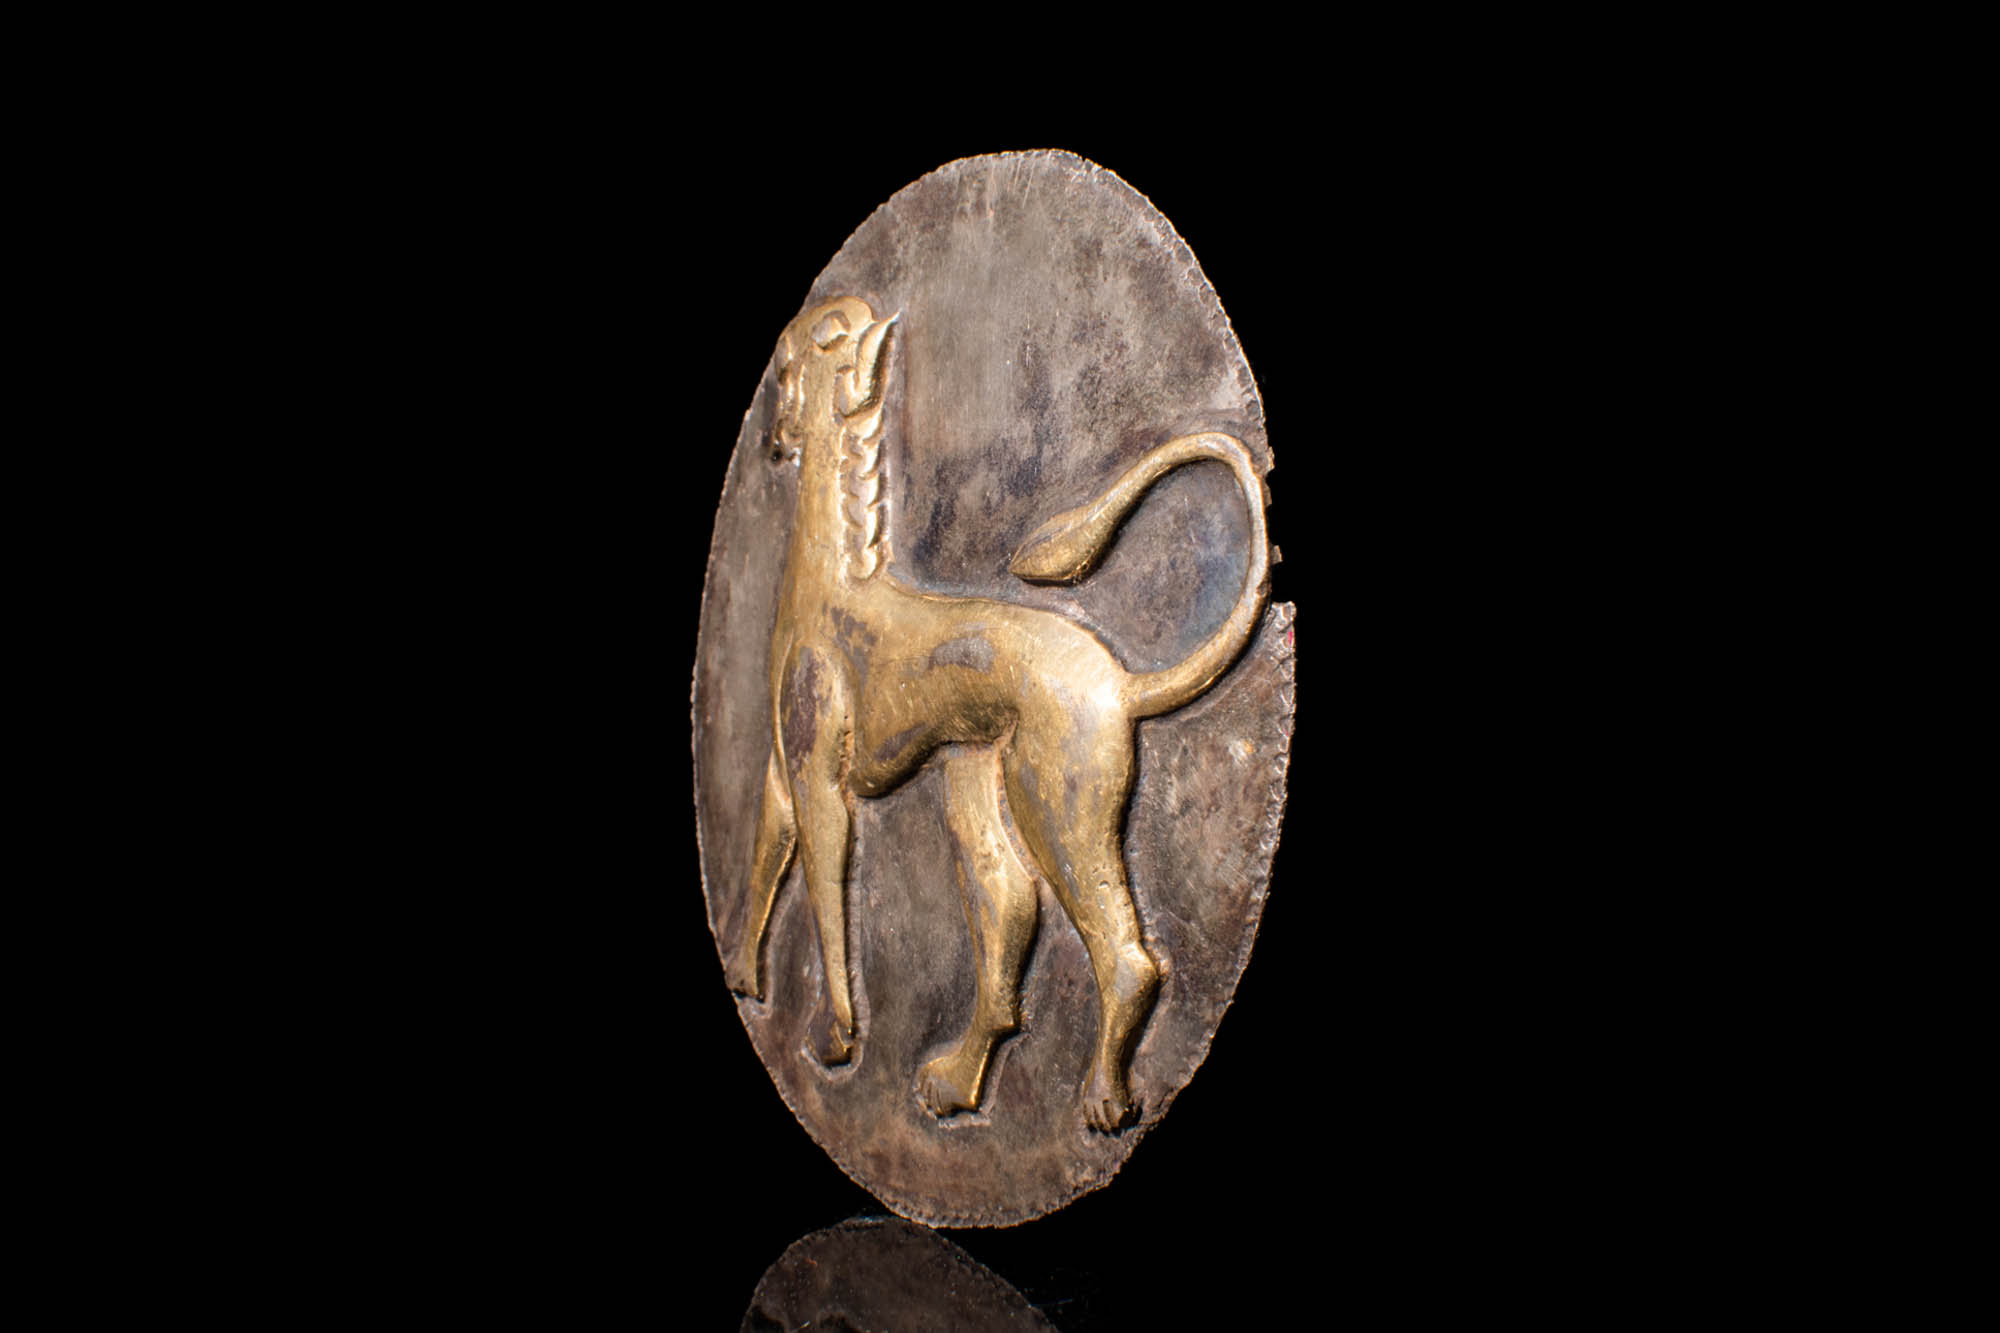 IRON AGE SILVER GILDED APPLIQUE DEPICTING A ROARING LION - Image 2 of 3